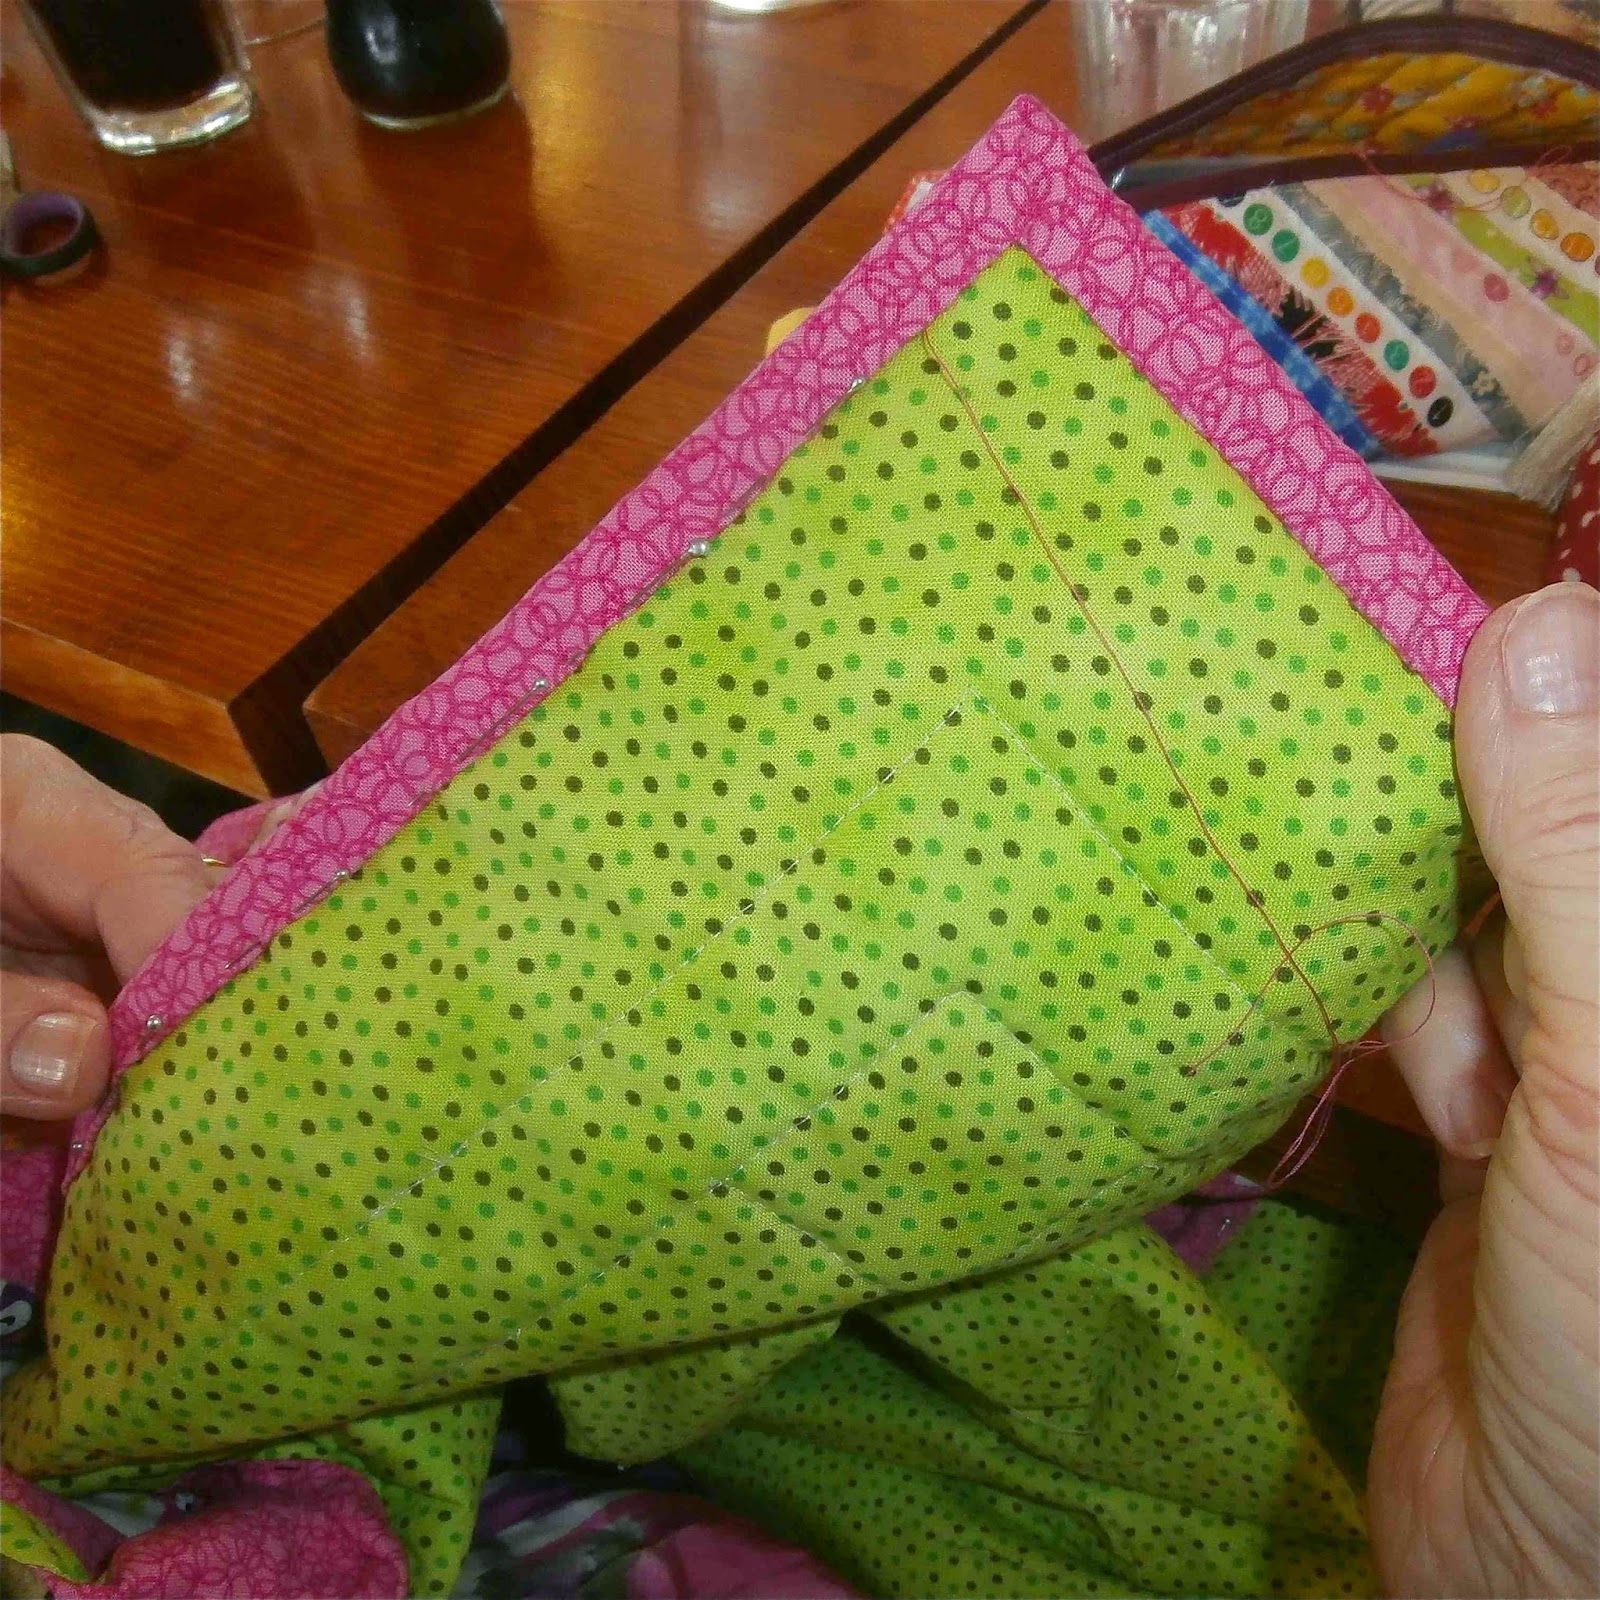 Sydney SCQuilters: Busy, busy, busy... very busy hands.